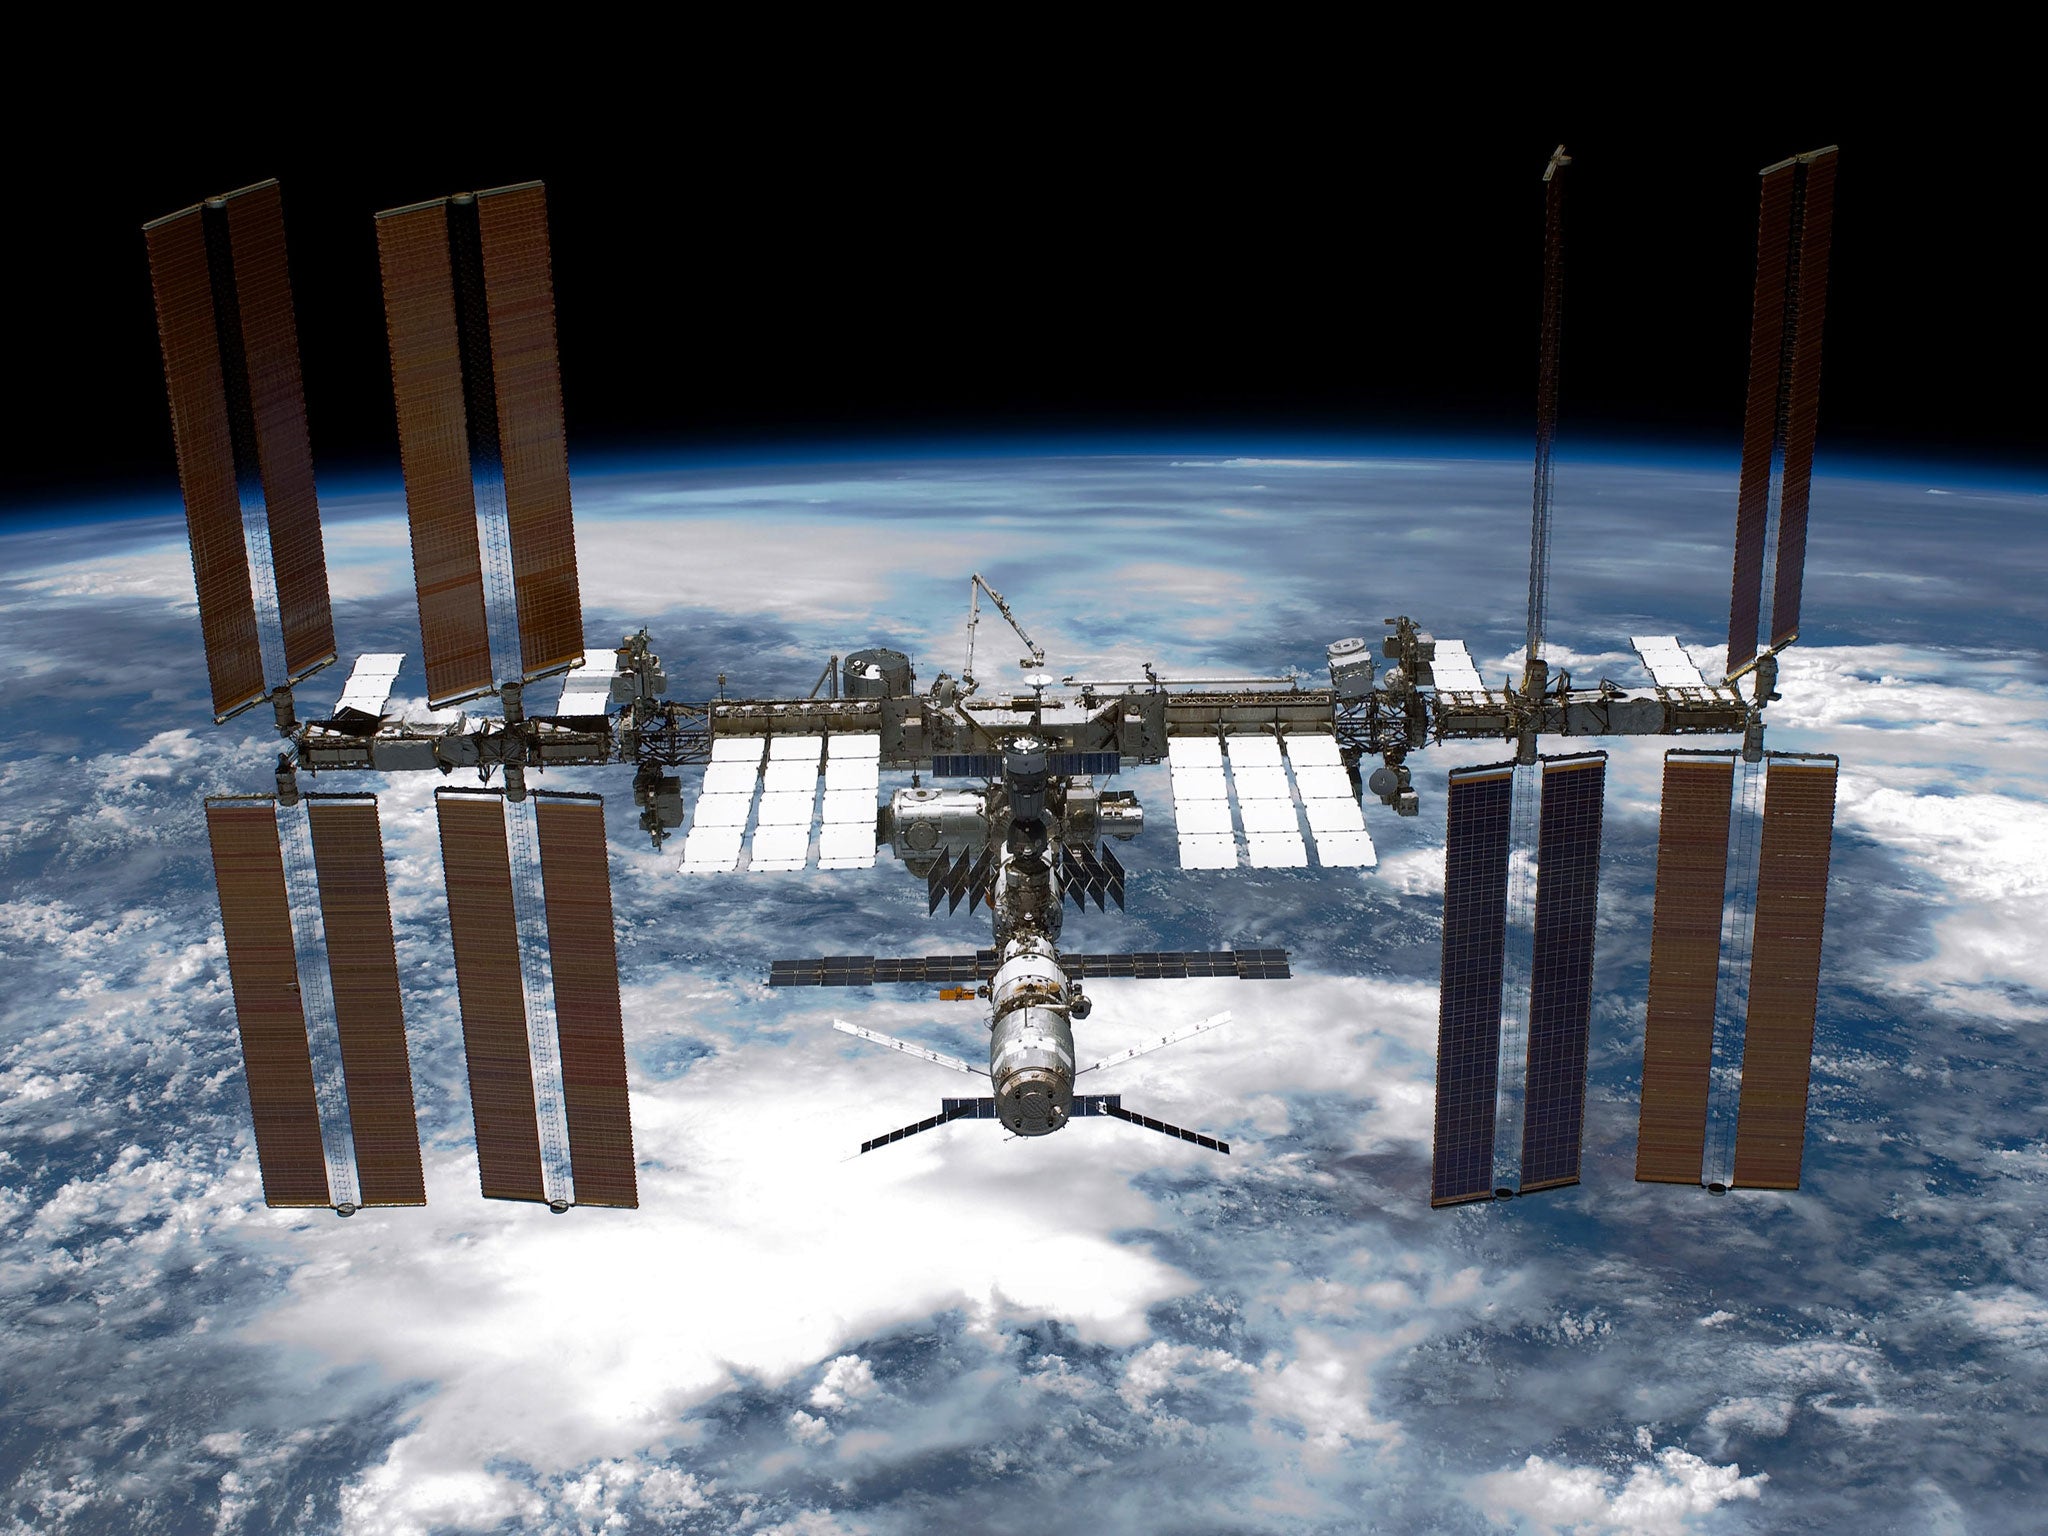 The six-member crew of the space station, which is in orbit 370 km above the earth, reported seeing small white flakes floating away from an area outside the craft yesterday